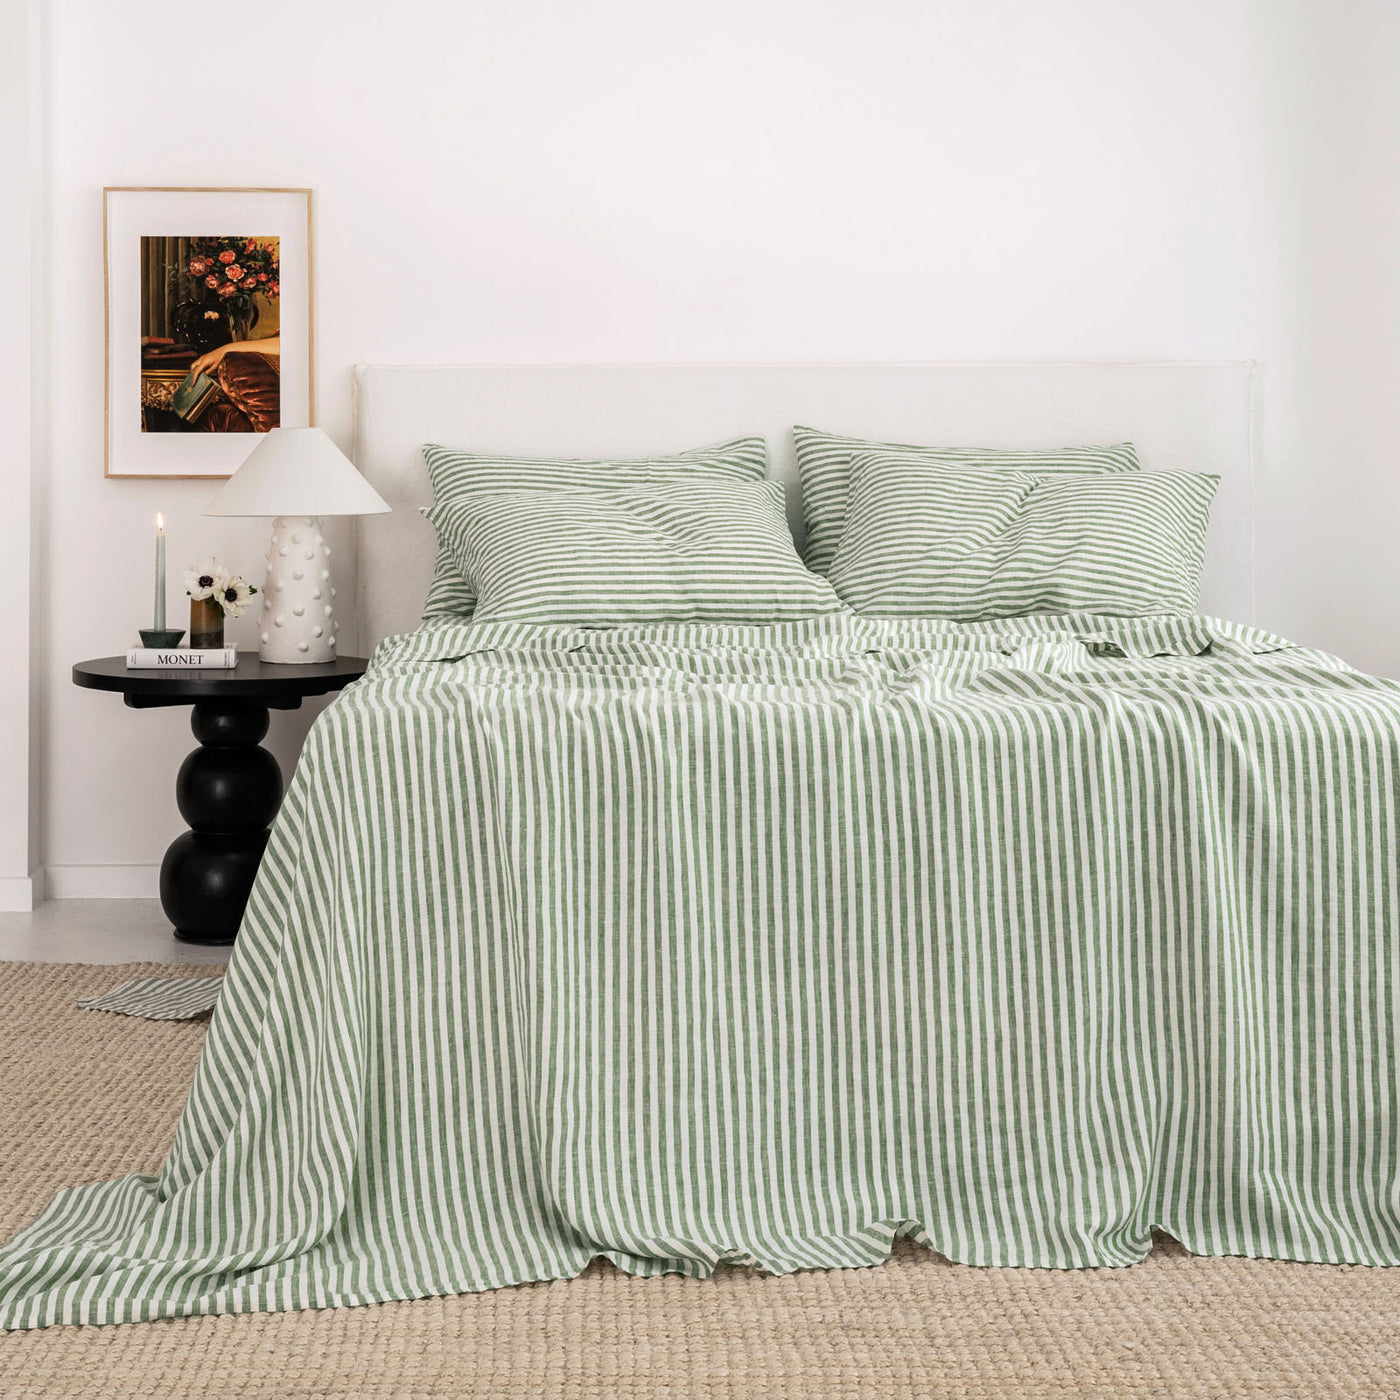 French Flax Linen Flat Sheet in Ivy Stripe